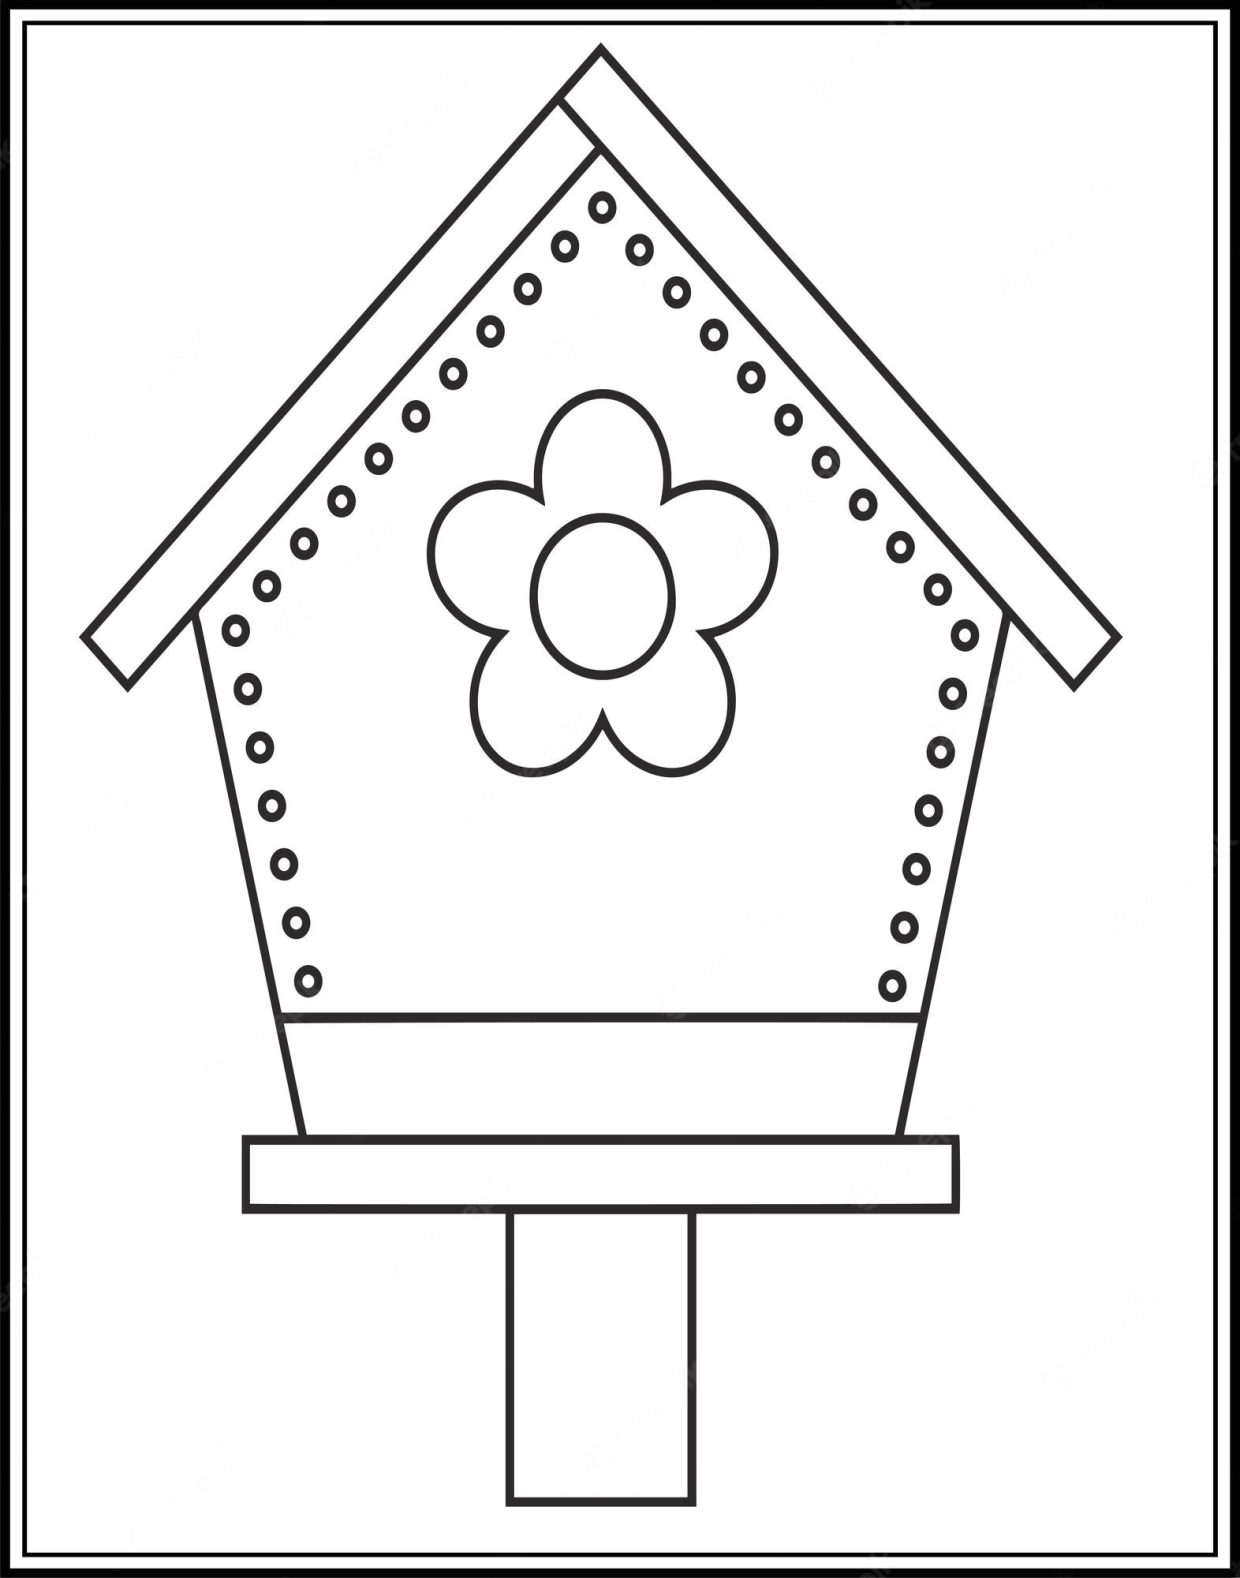 Bird House Coloring Pages: Printable, Free, and Easy to Color